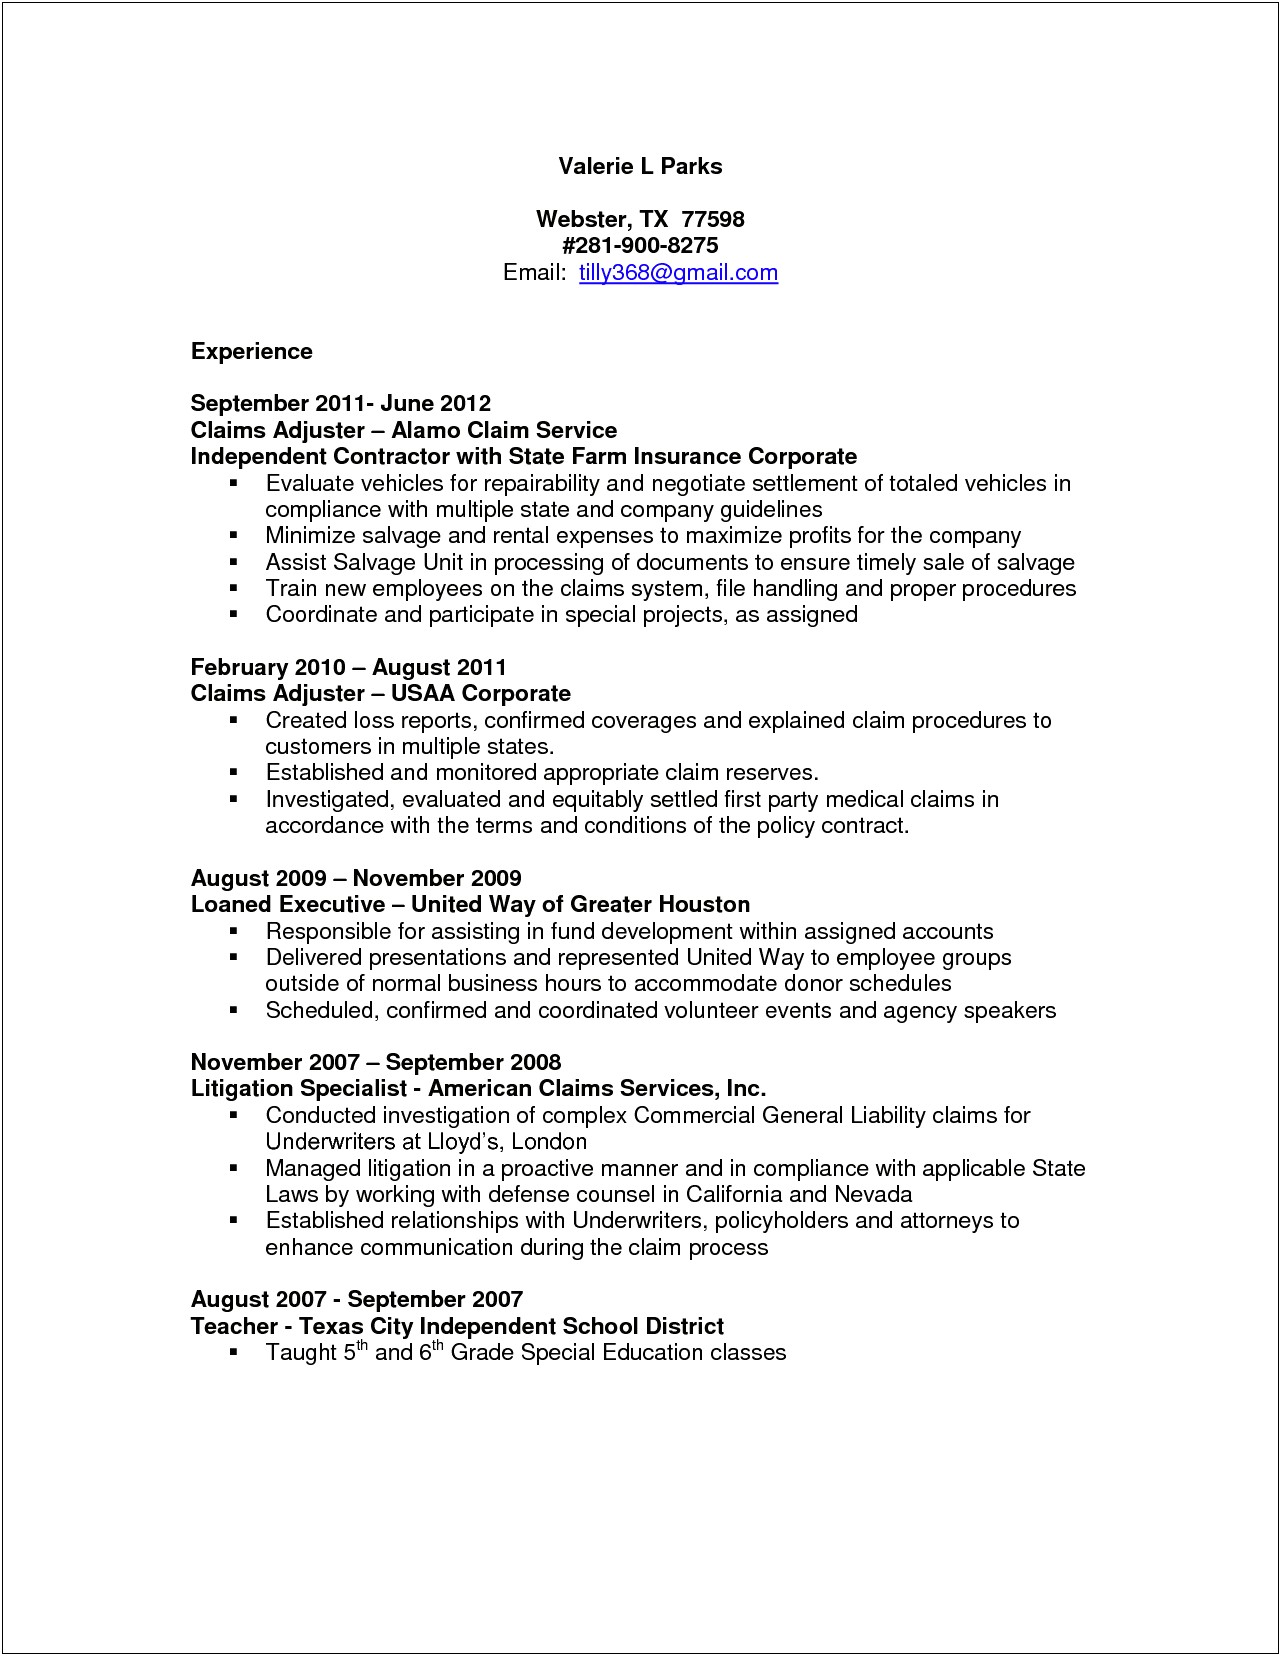 Resume Objective Statement For Property Claims Adjuster